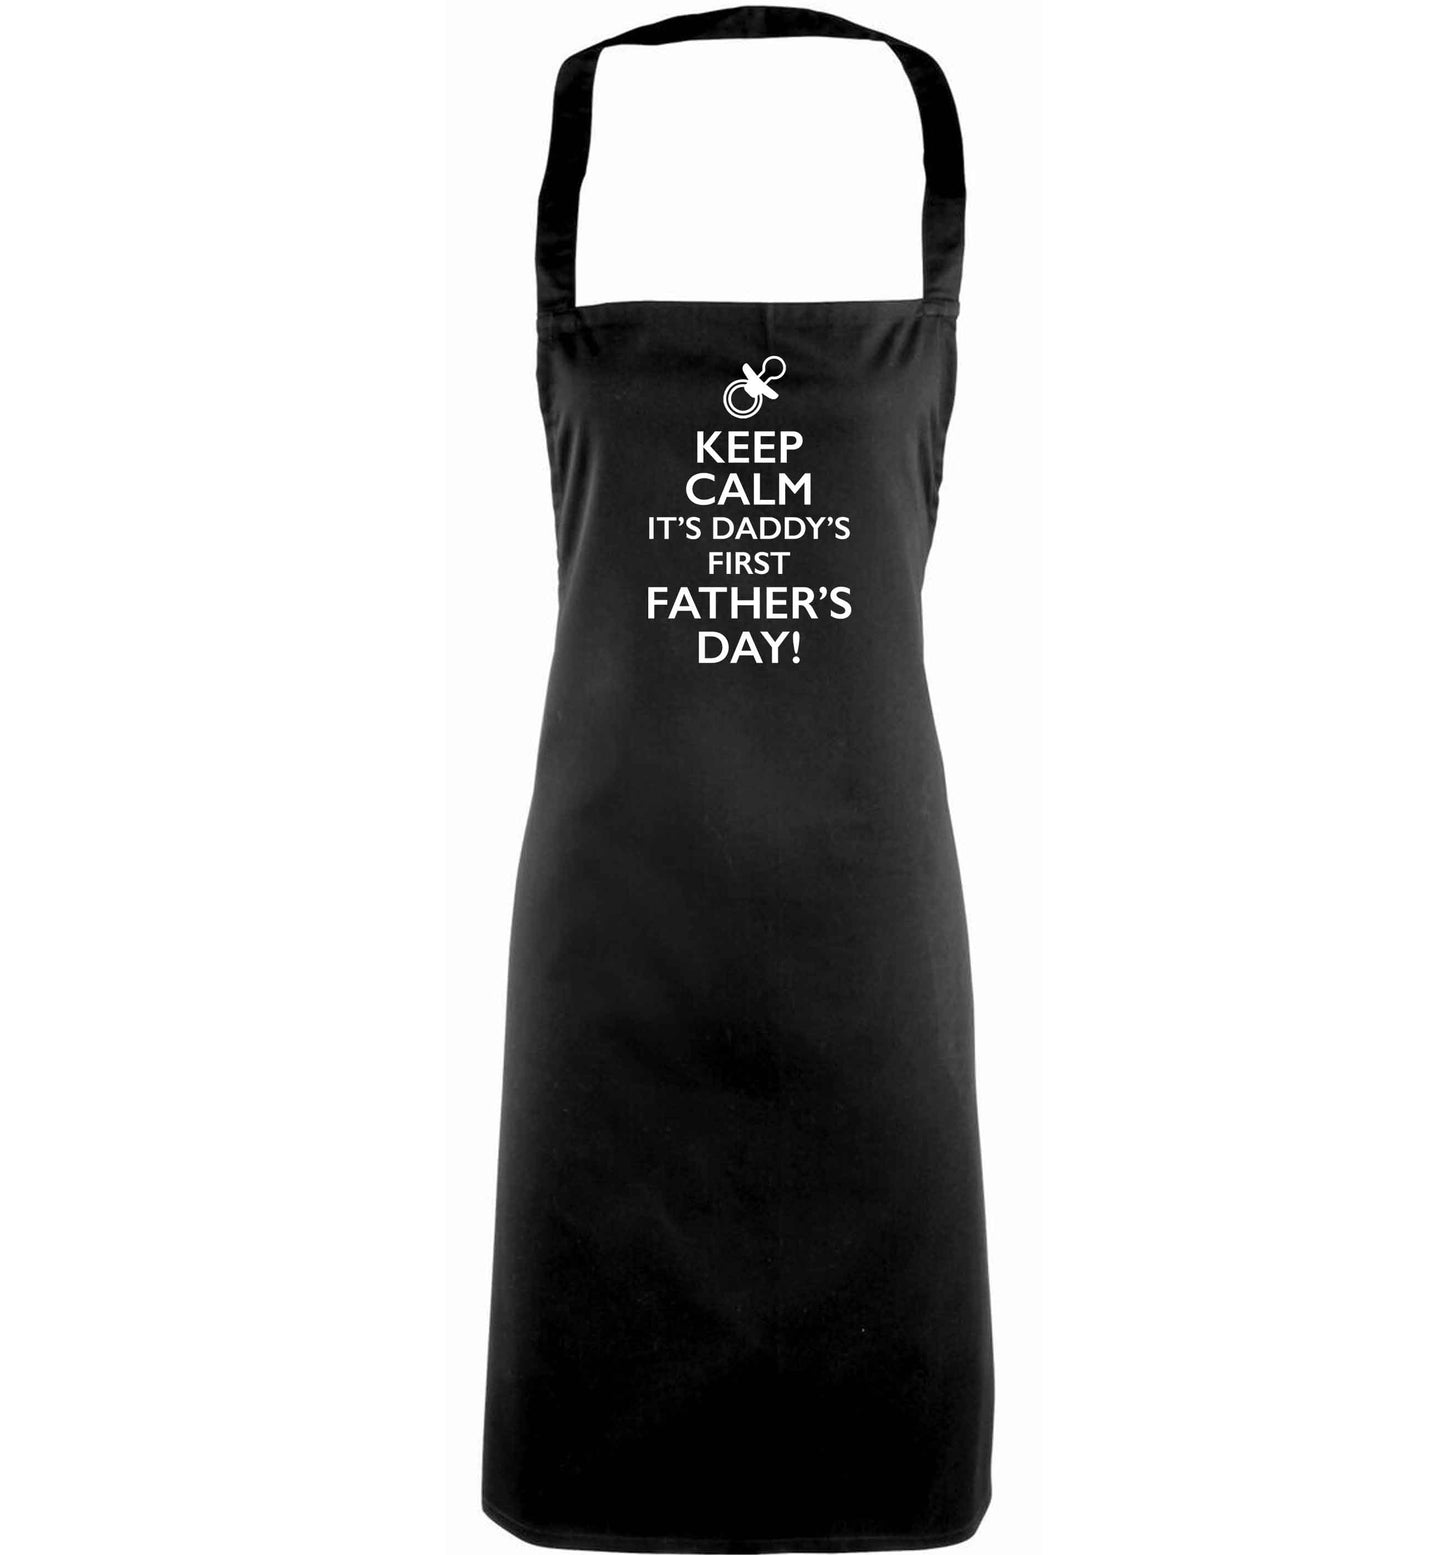 Keep calm it's daddys first father's day adults black apron